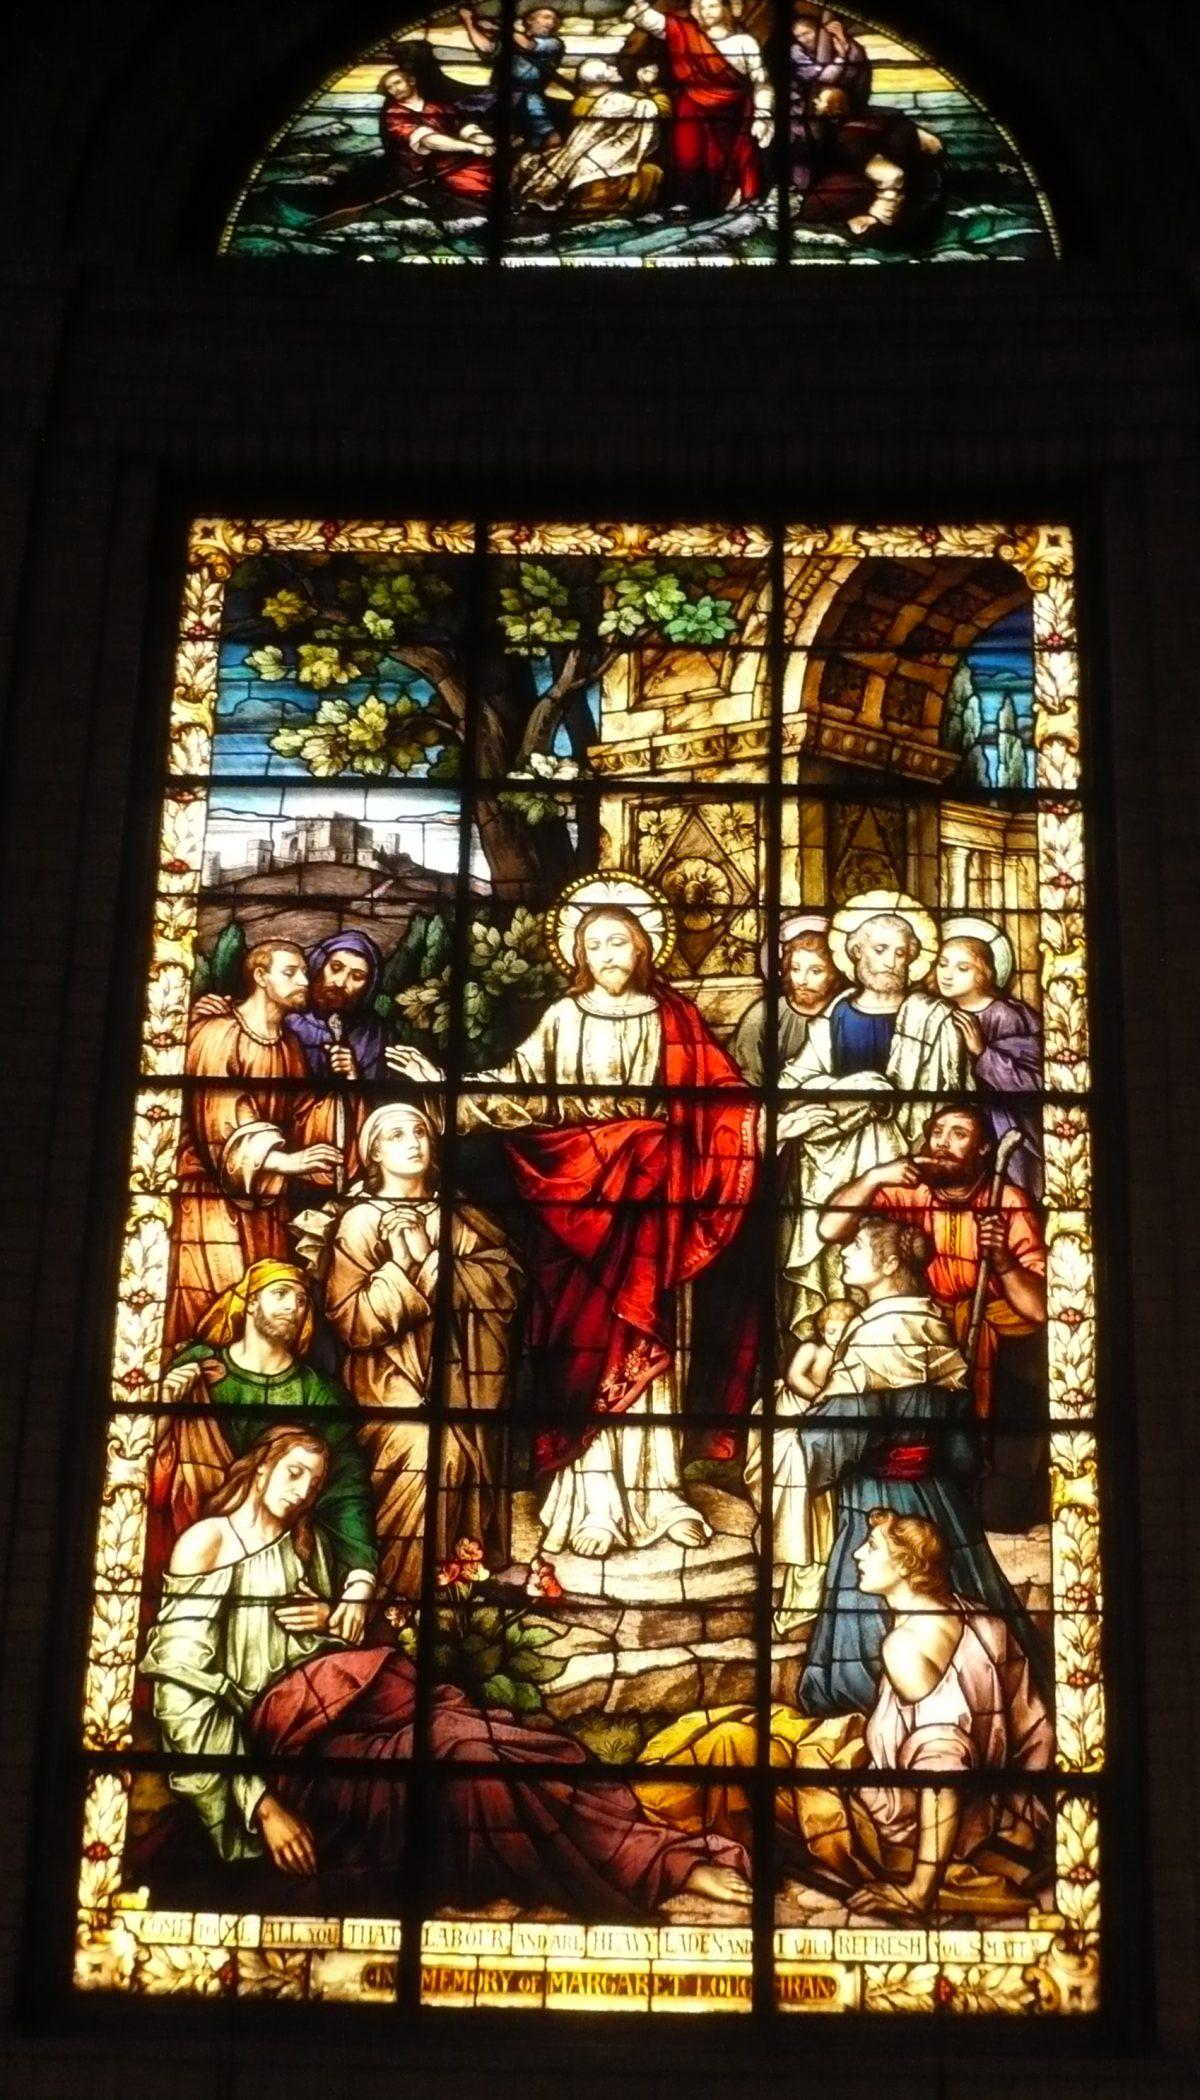 A stained-glass window in the Basilica of St. Lawrence. (CC BY-SA 3.0)